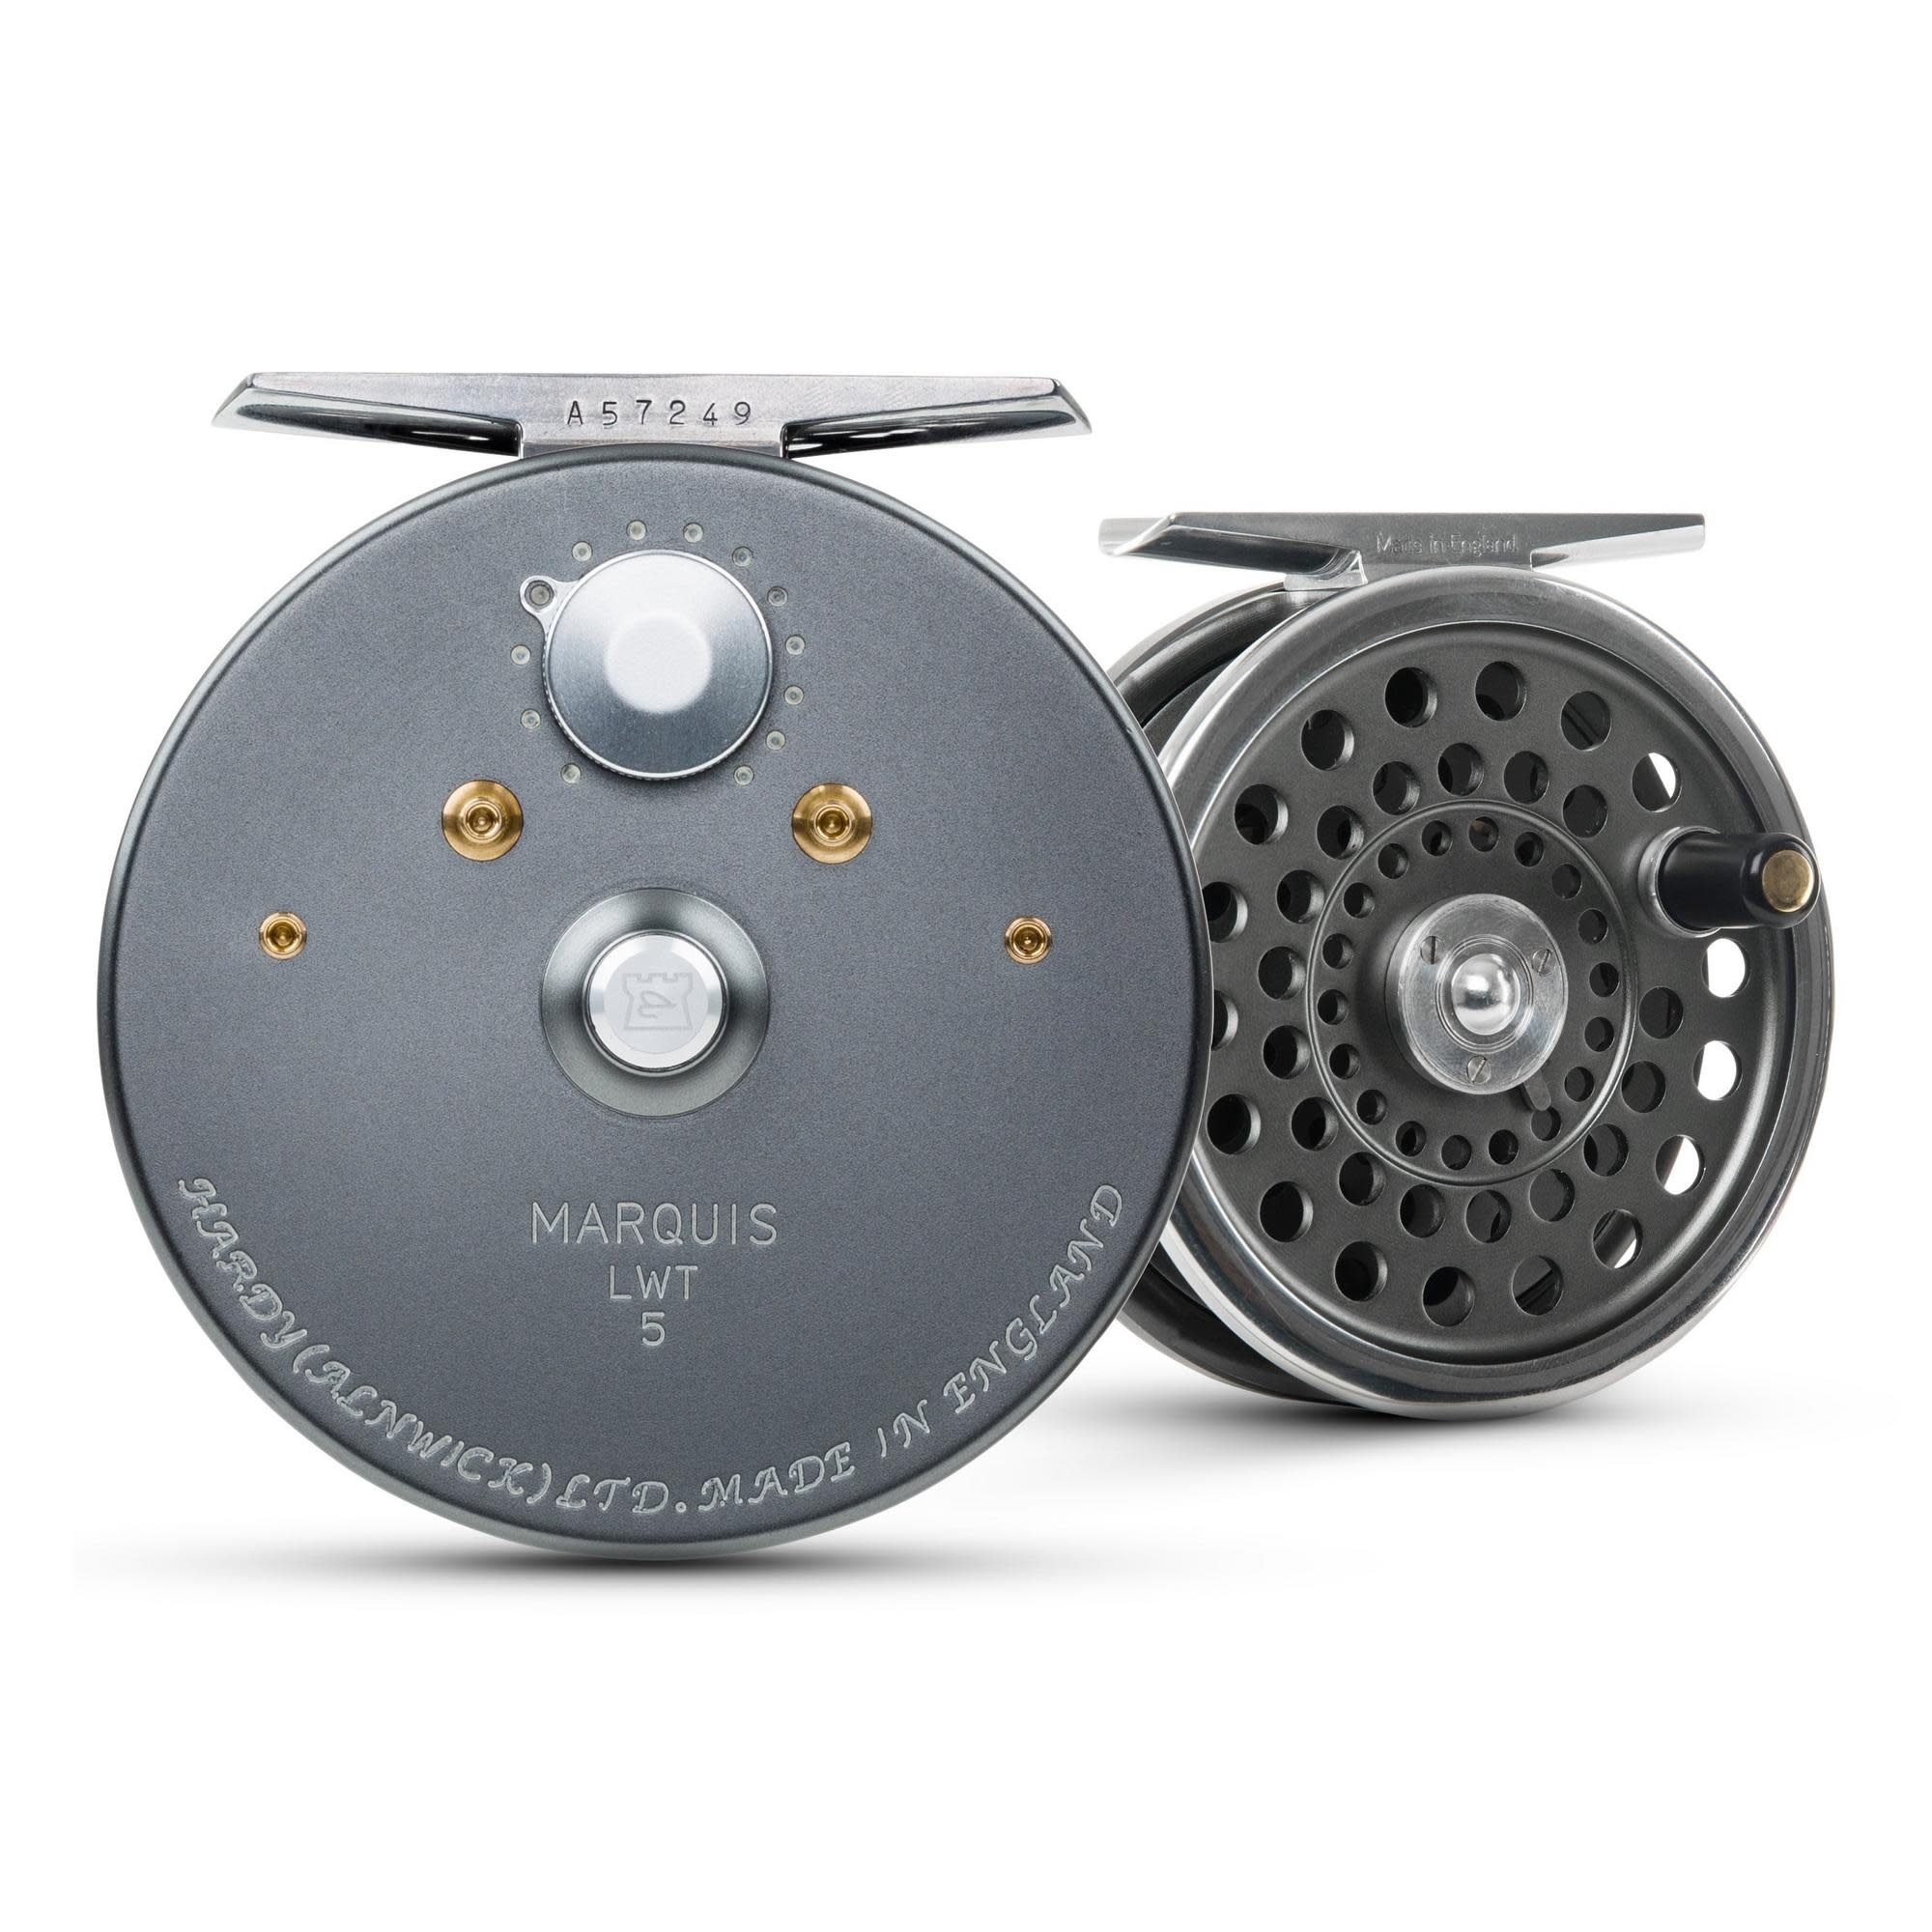 Hardy Trout Fishing Reels for sale